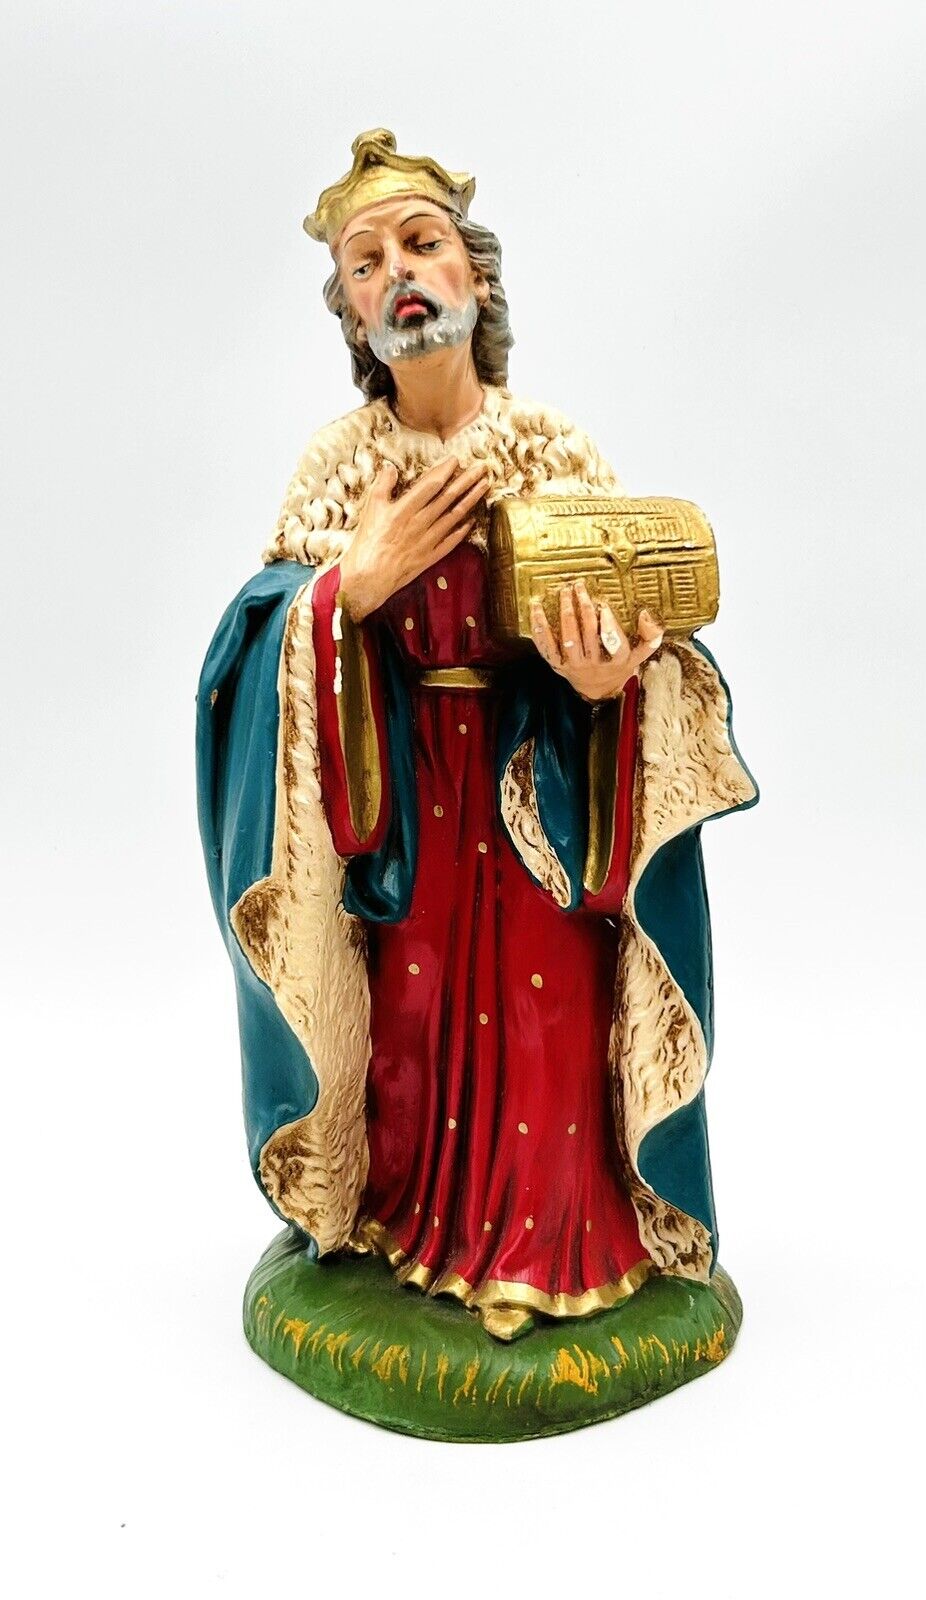 Vintage Wise Men King Nativity Figurine Paper Mache 12” Scale Made In Italy